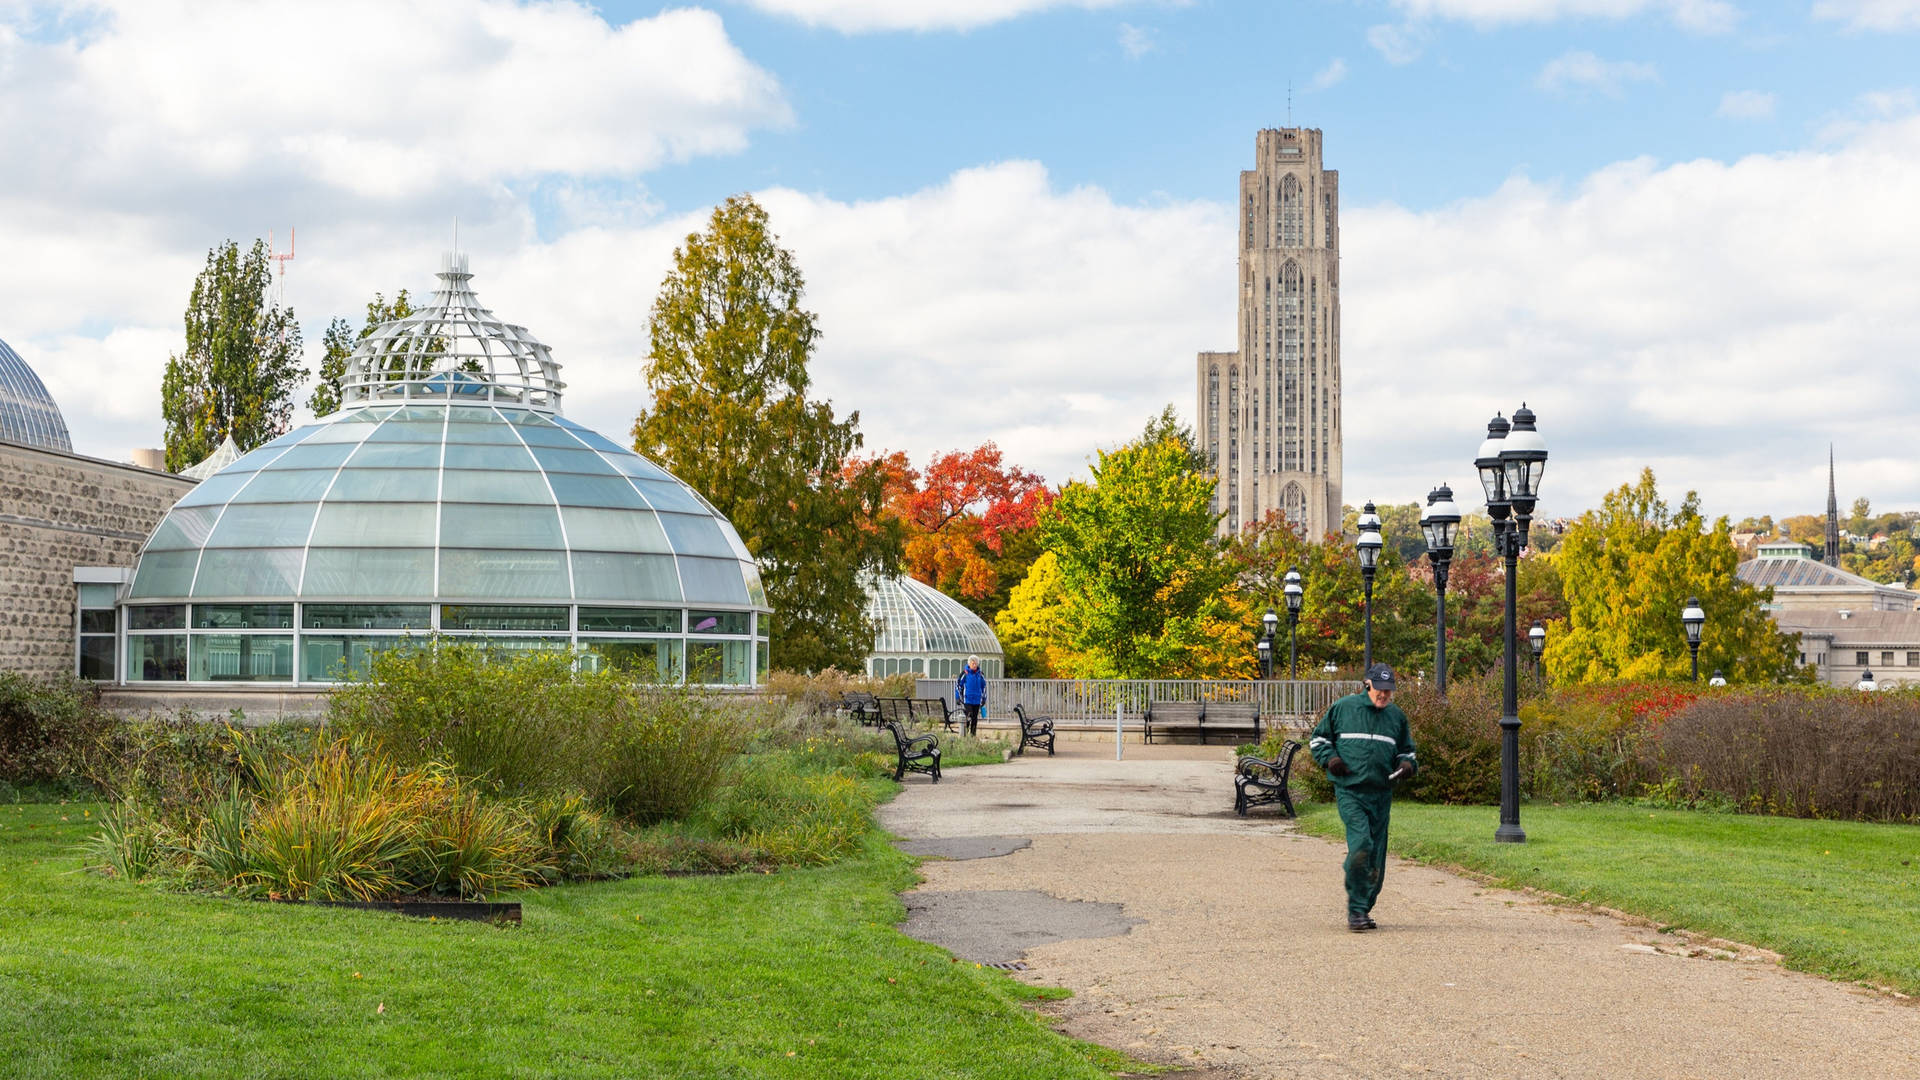 University Of Pittsburgh And Phipps Conservatory Background